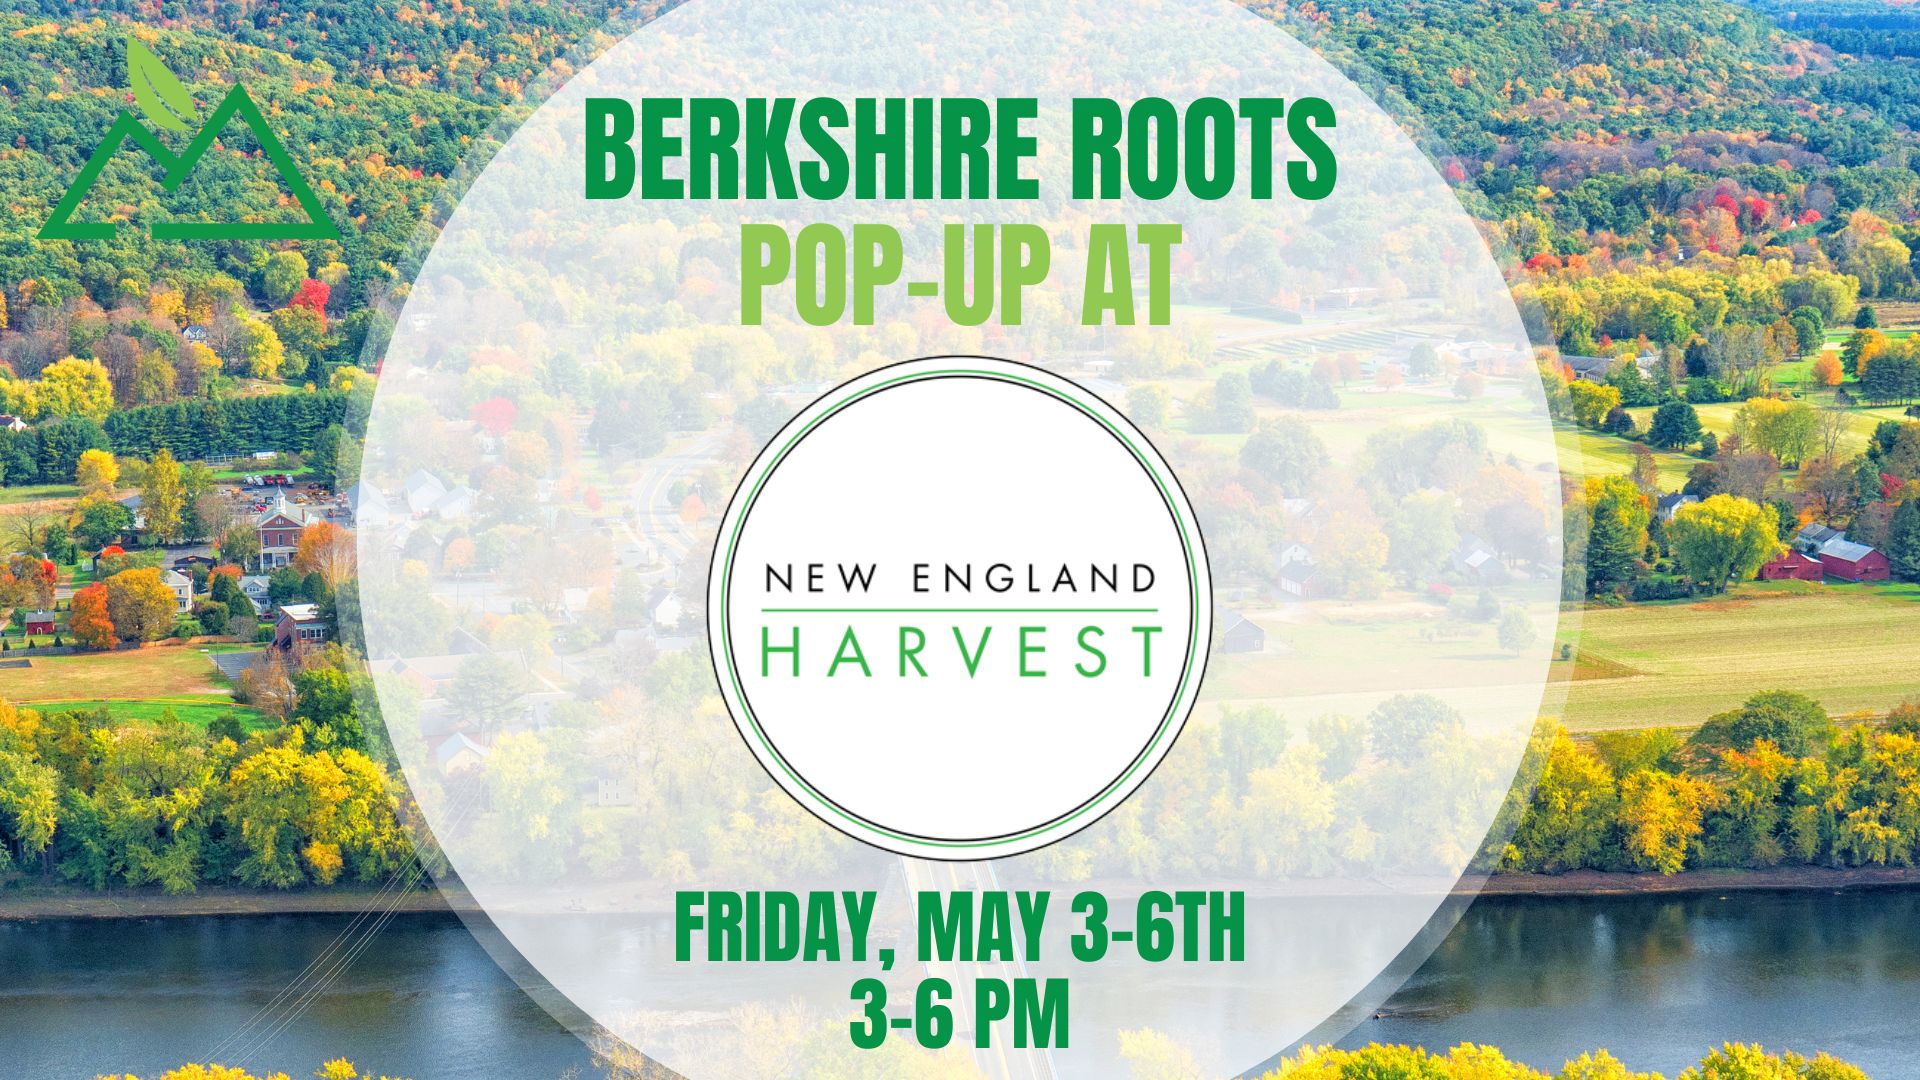 Berkshire Roots Pop up at New England Harvest